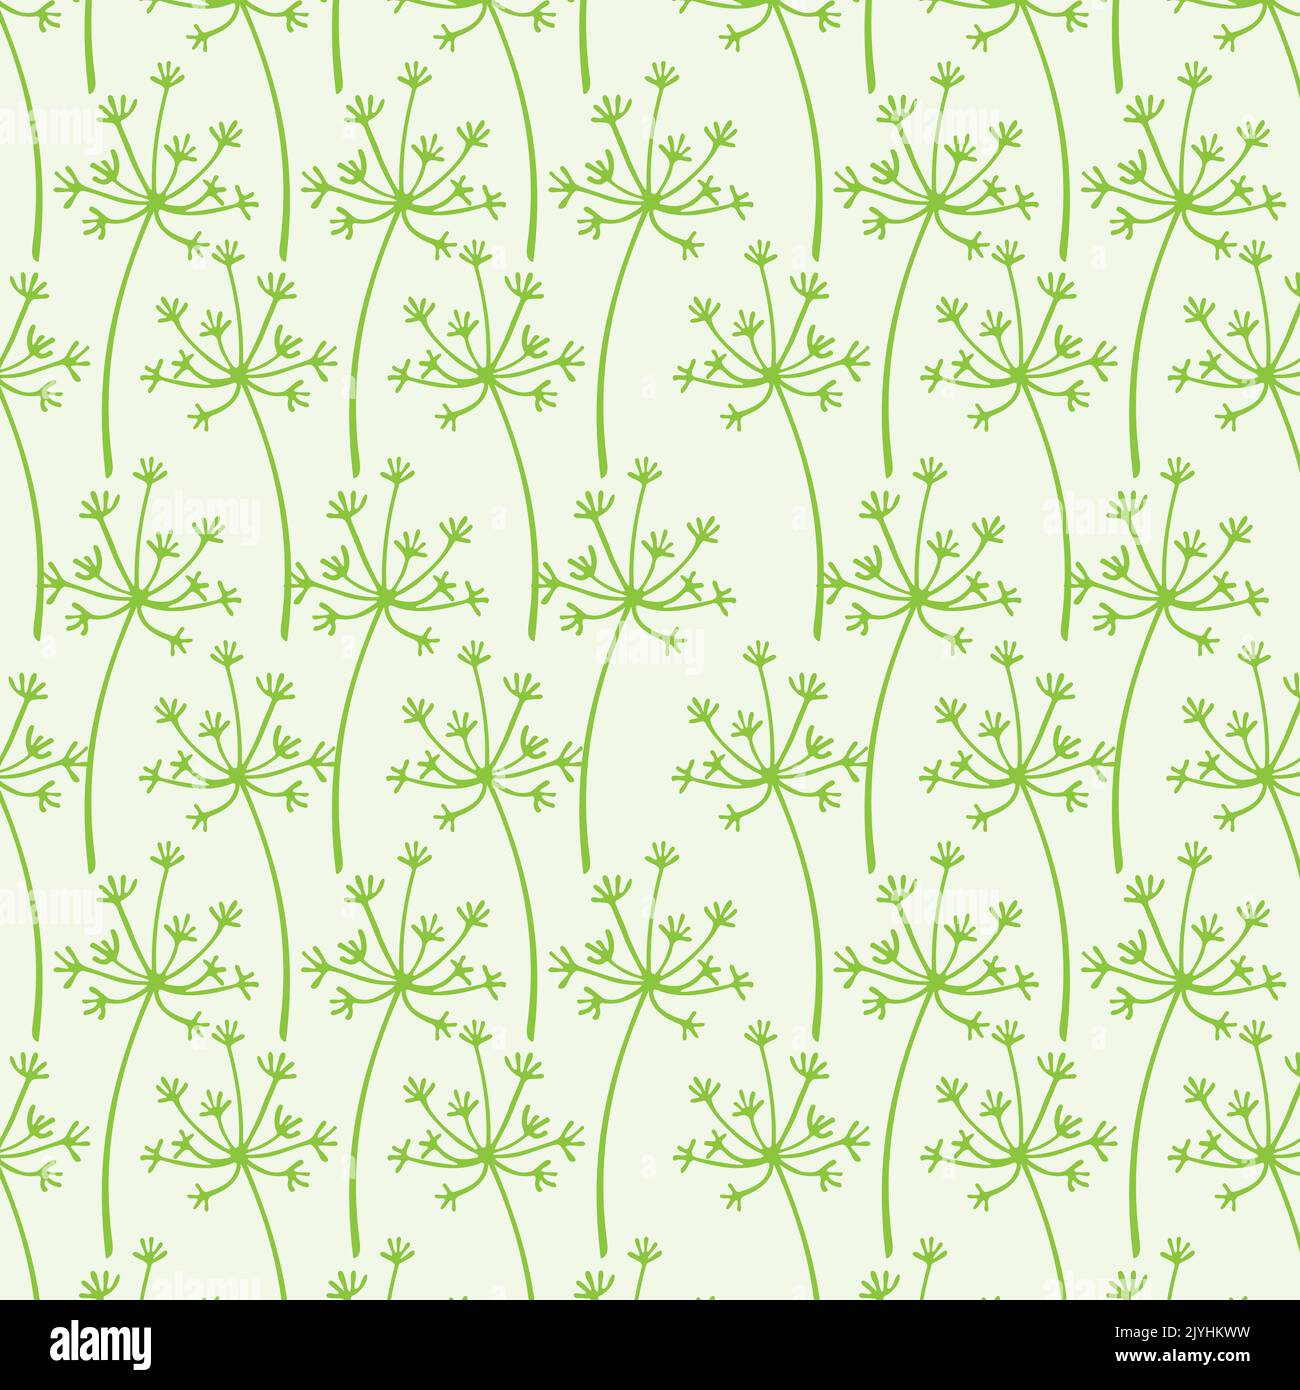 Fennel pattern Stock Vector Images - Alamy